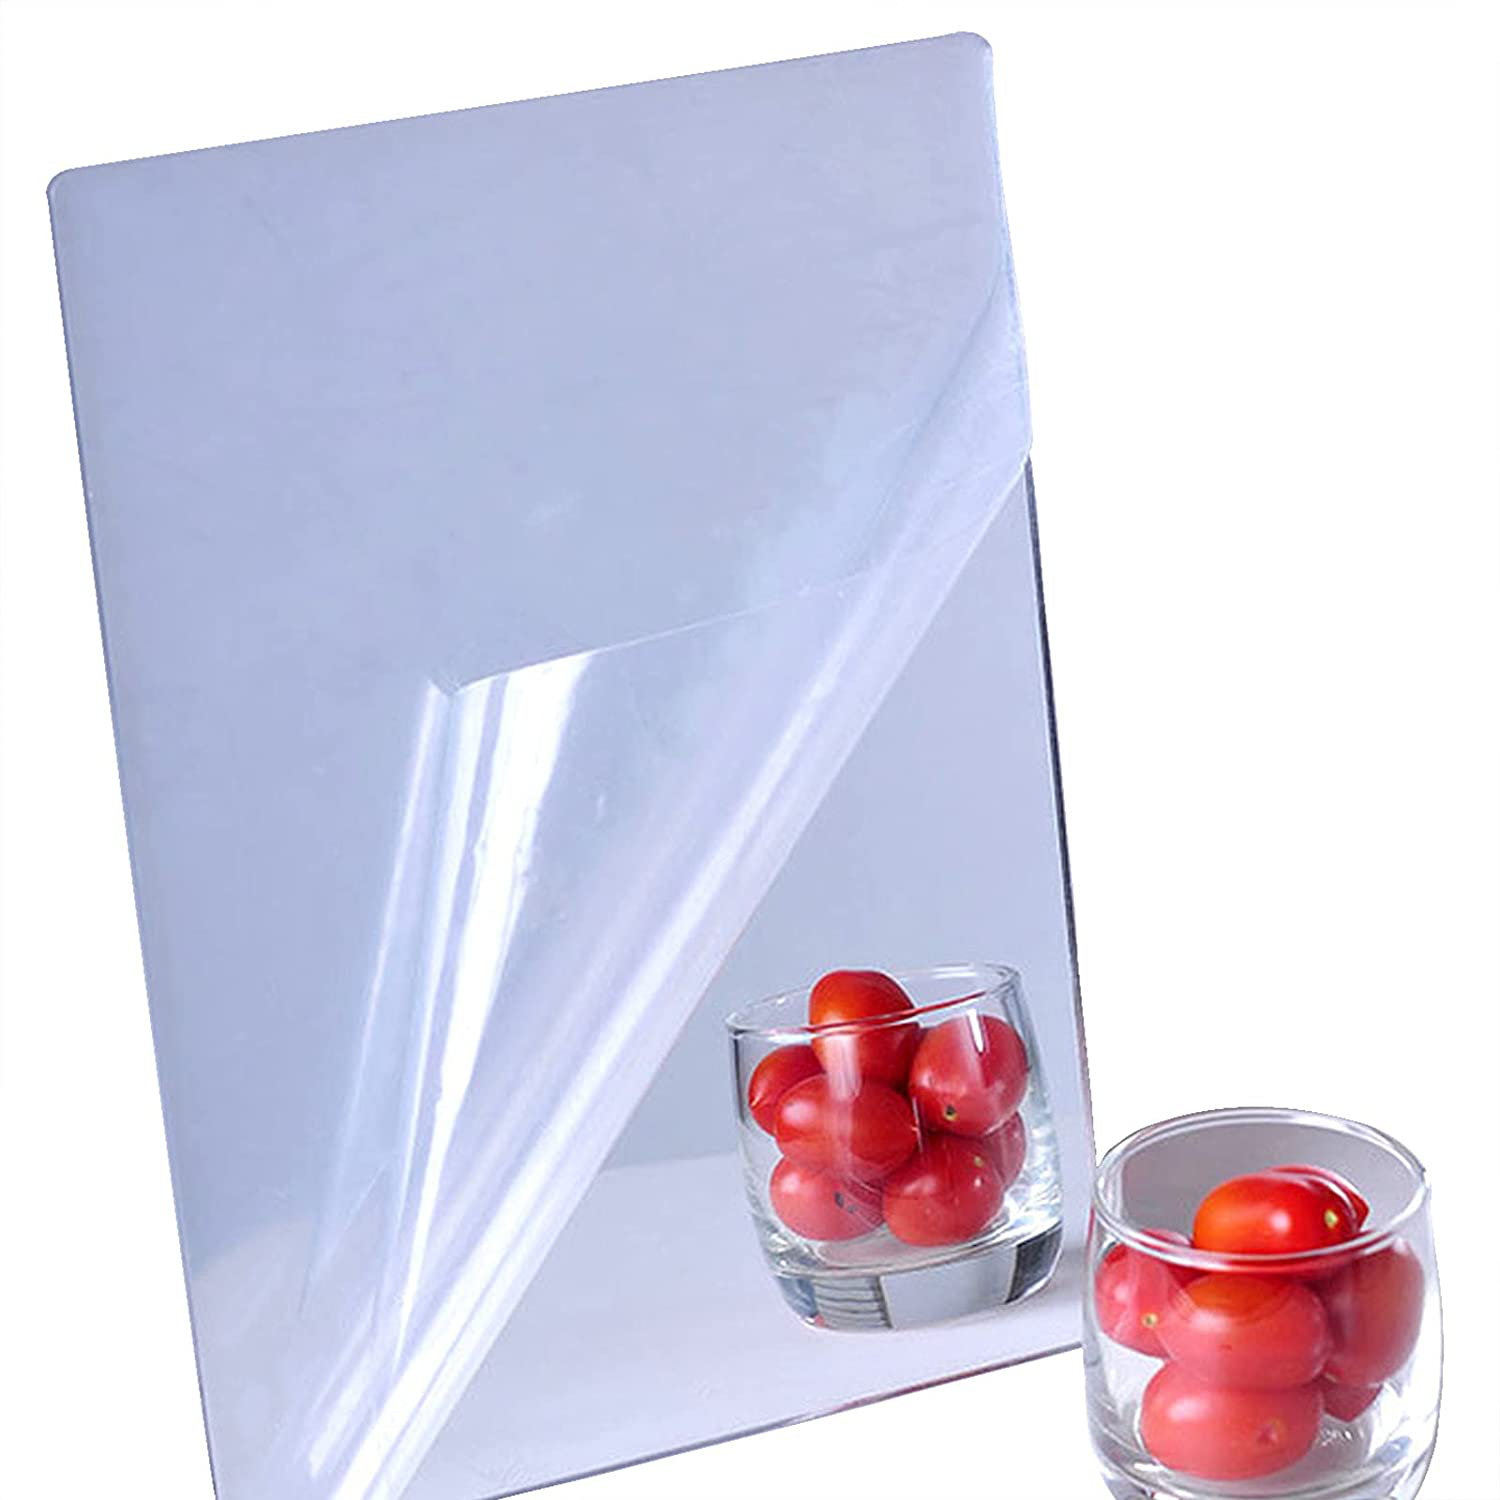 NEW SQUARE PLASTIC MIRROR WALL TILES ANTI-SHATTER SAFETY MIRROR PERSPEX SHEET 